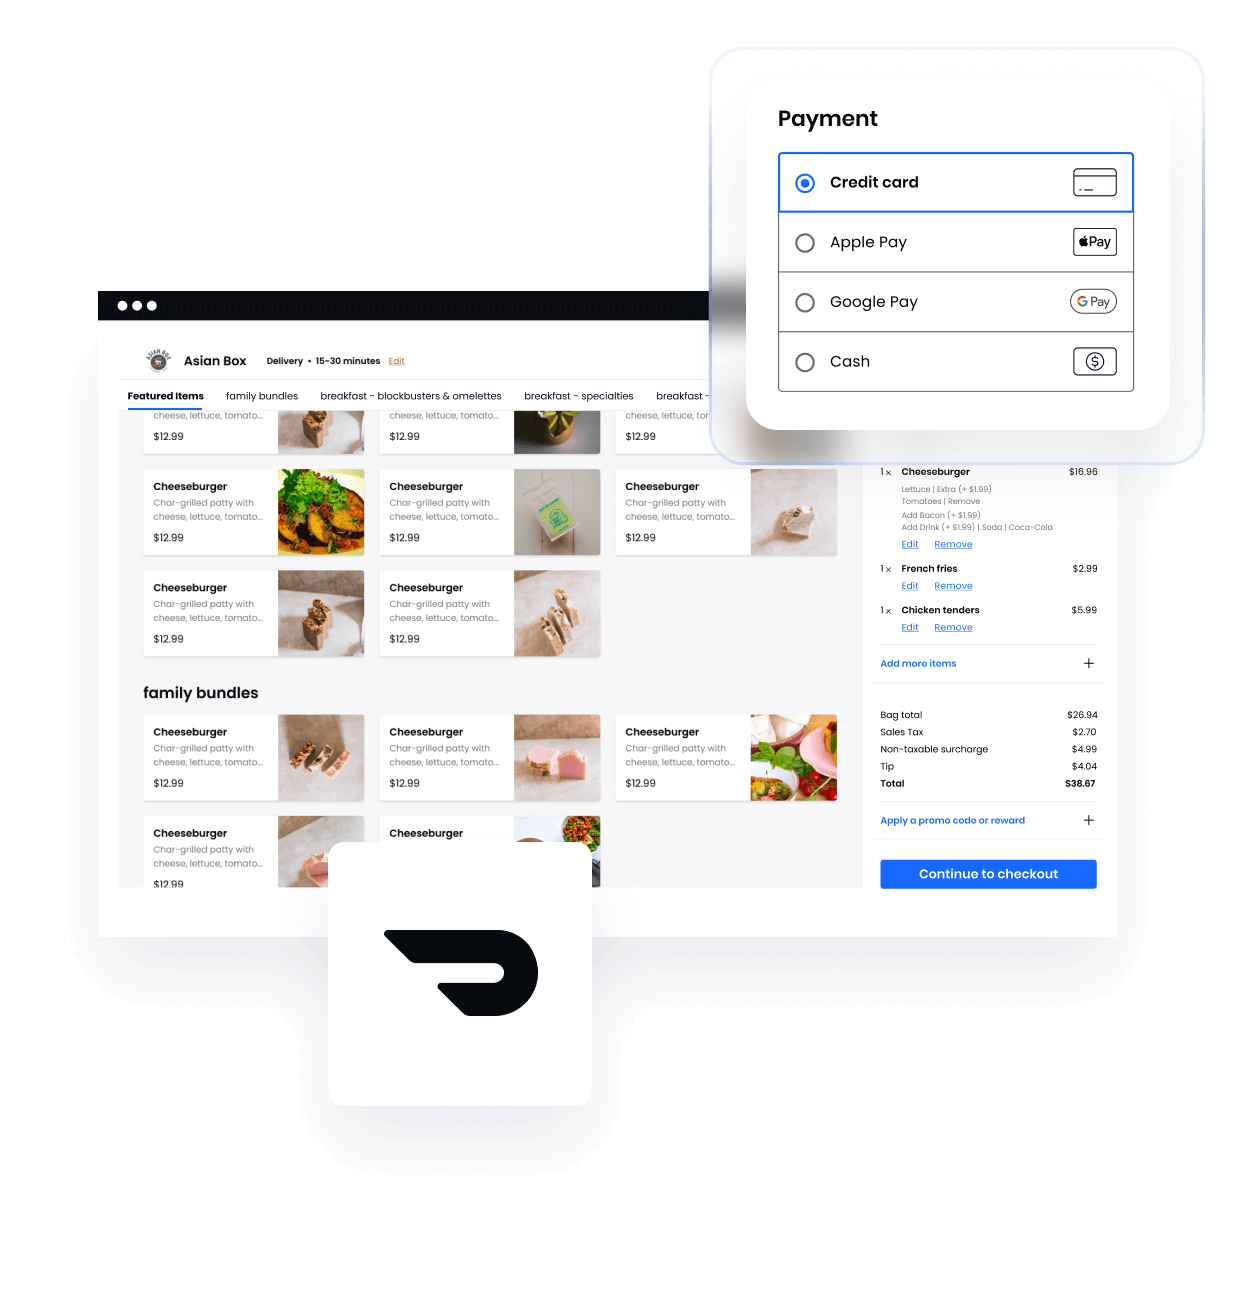 Image Online ordering that benefits you, not third-party apps